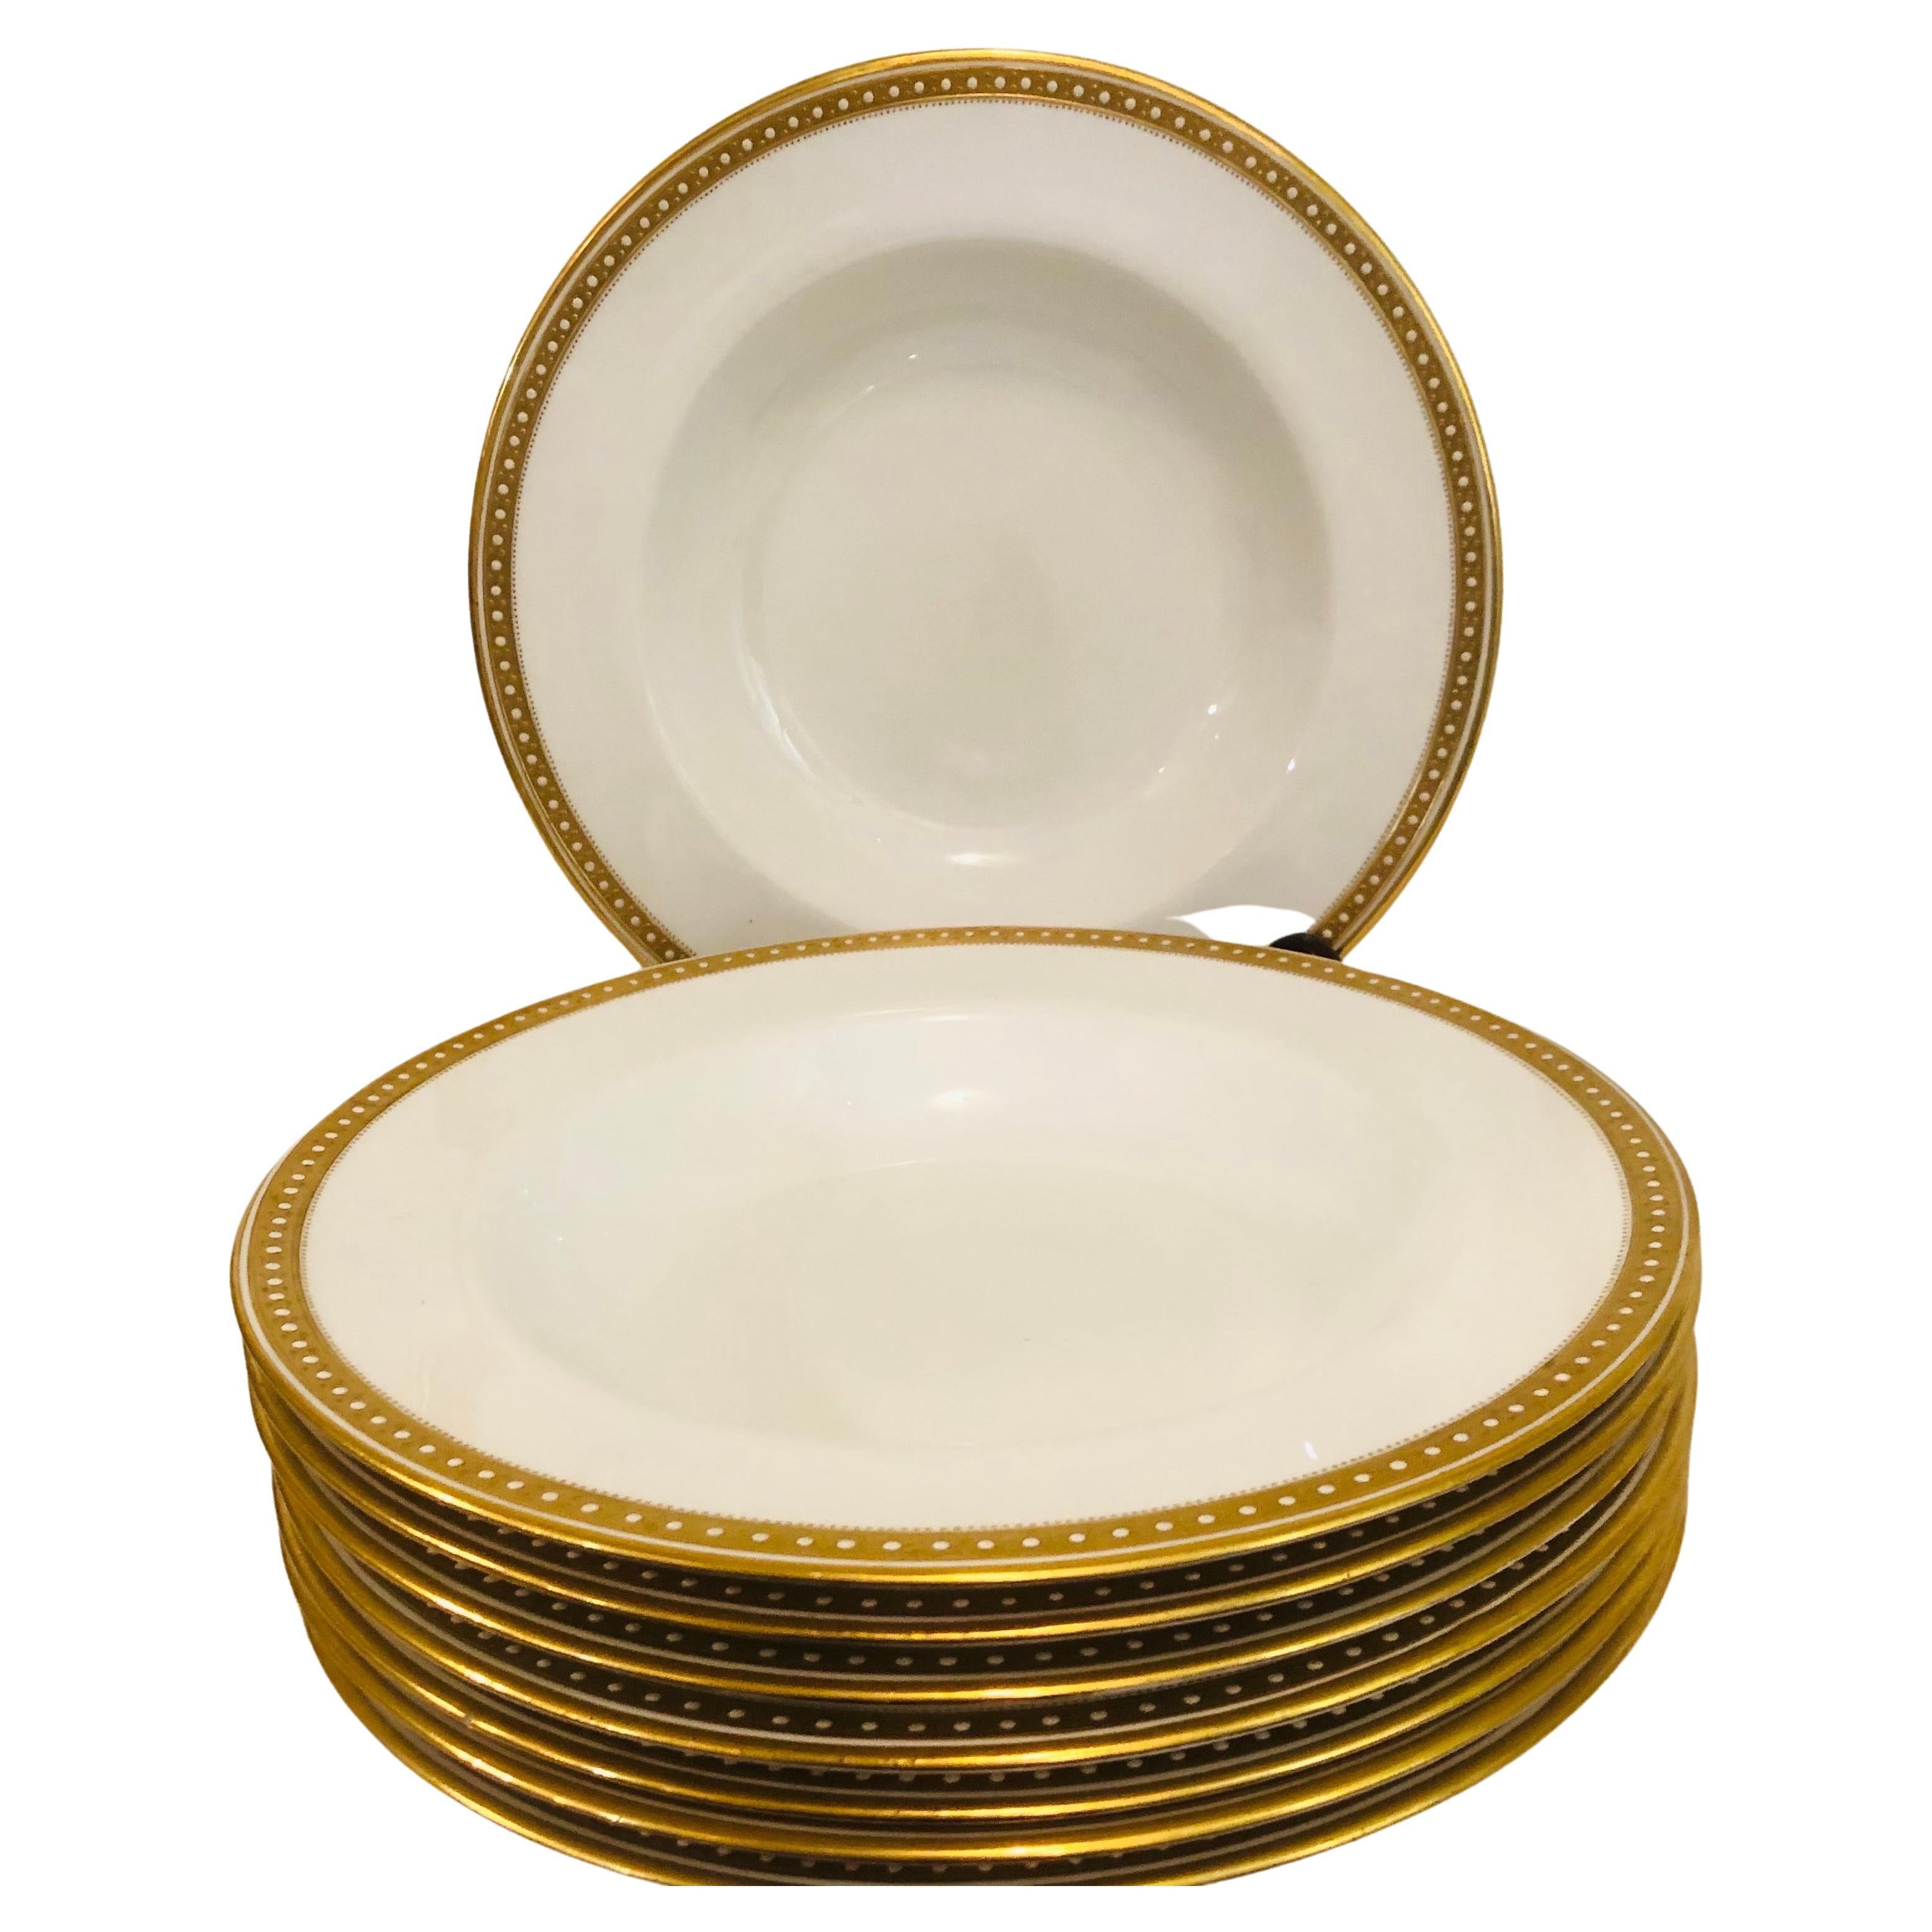 I am offering you this exquisite set of sixteen Copeland Spode deep wide rim soup bowls, which each have a gold border with white enamel jeweling on a white porcelain background. They definitely look like simple elegance, and they would look